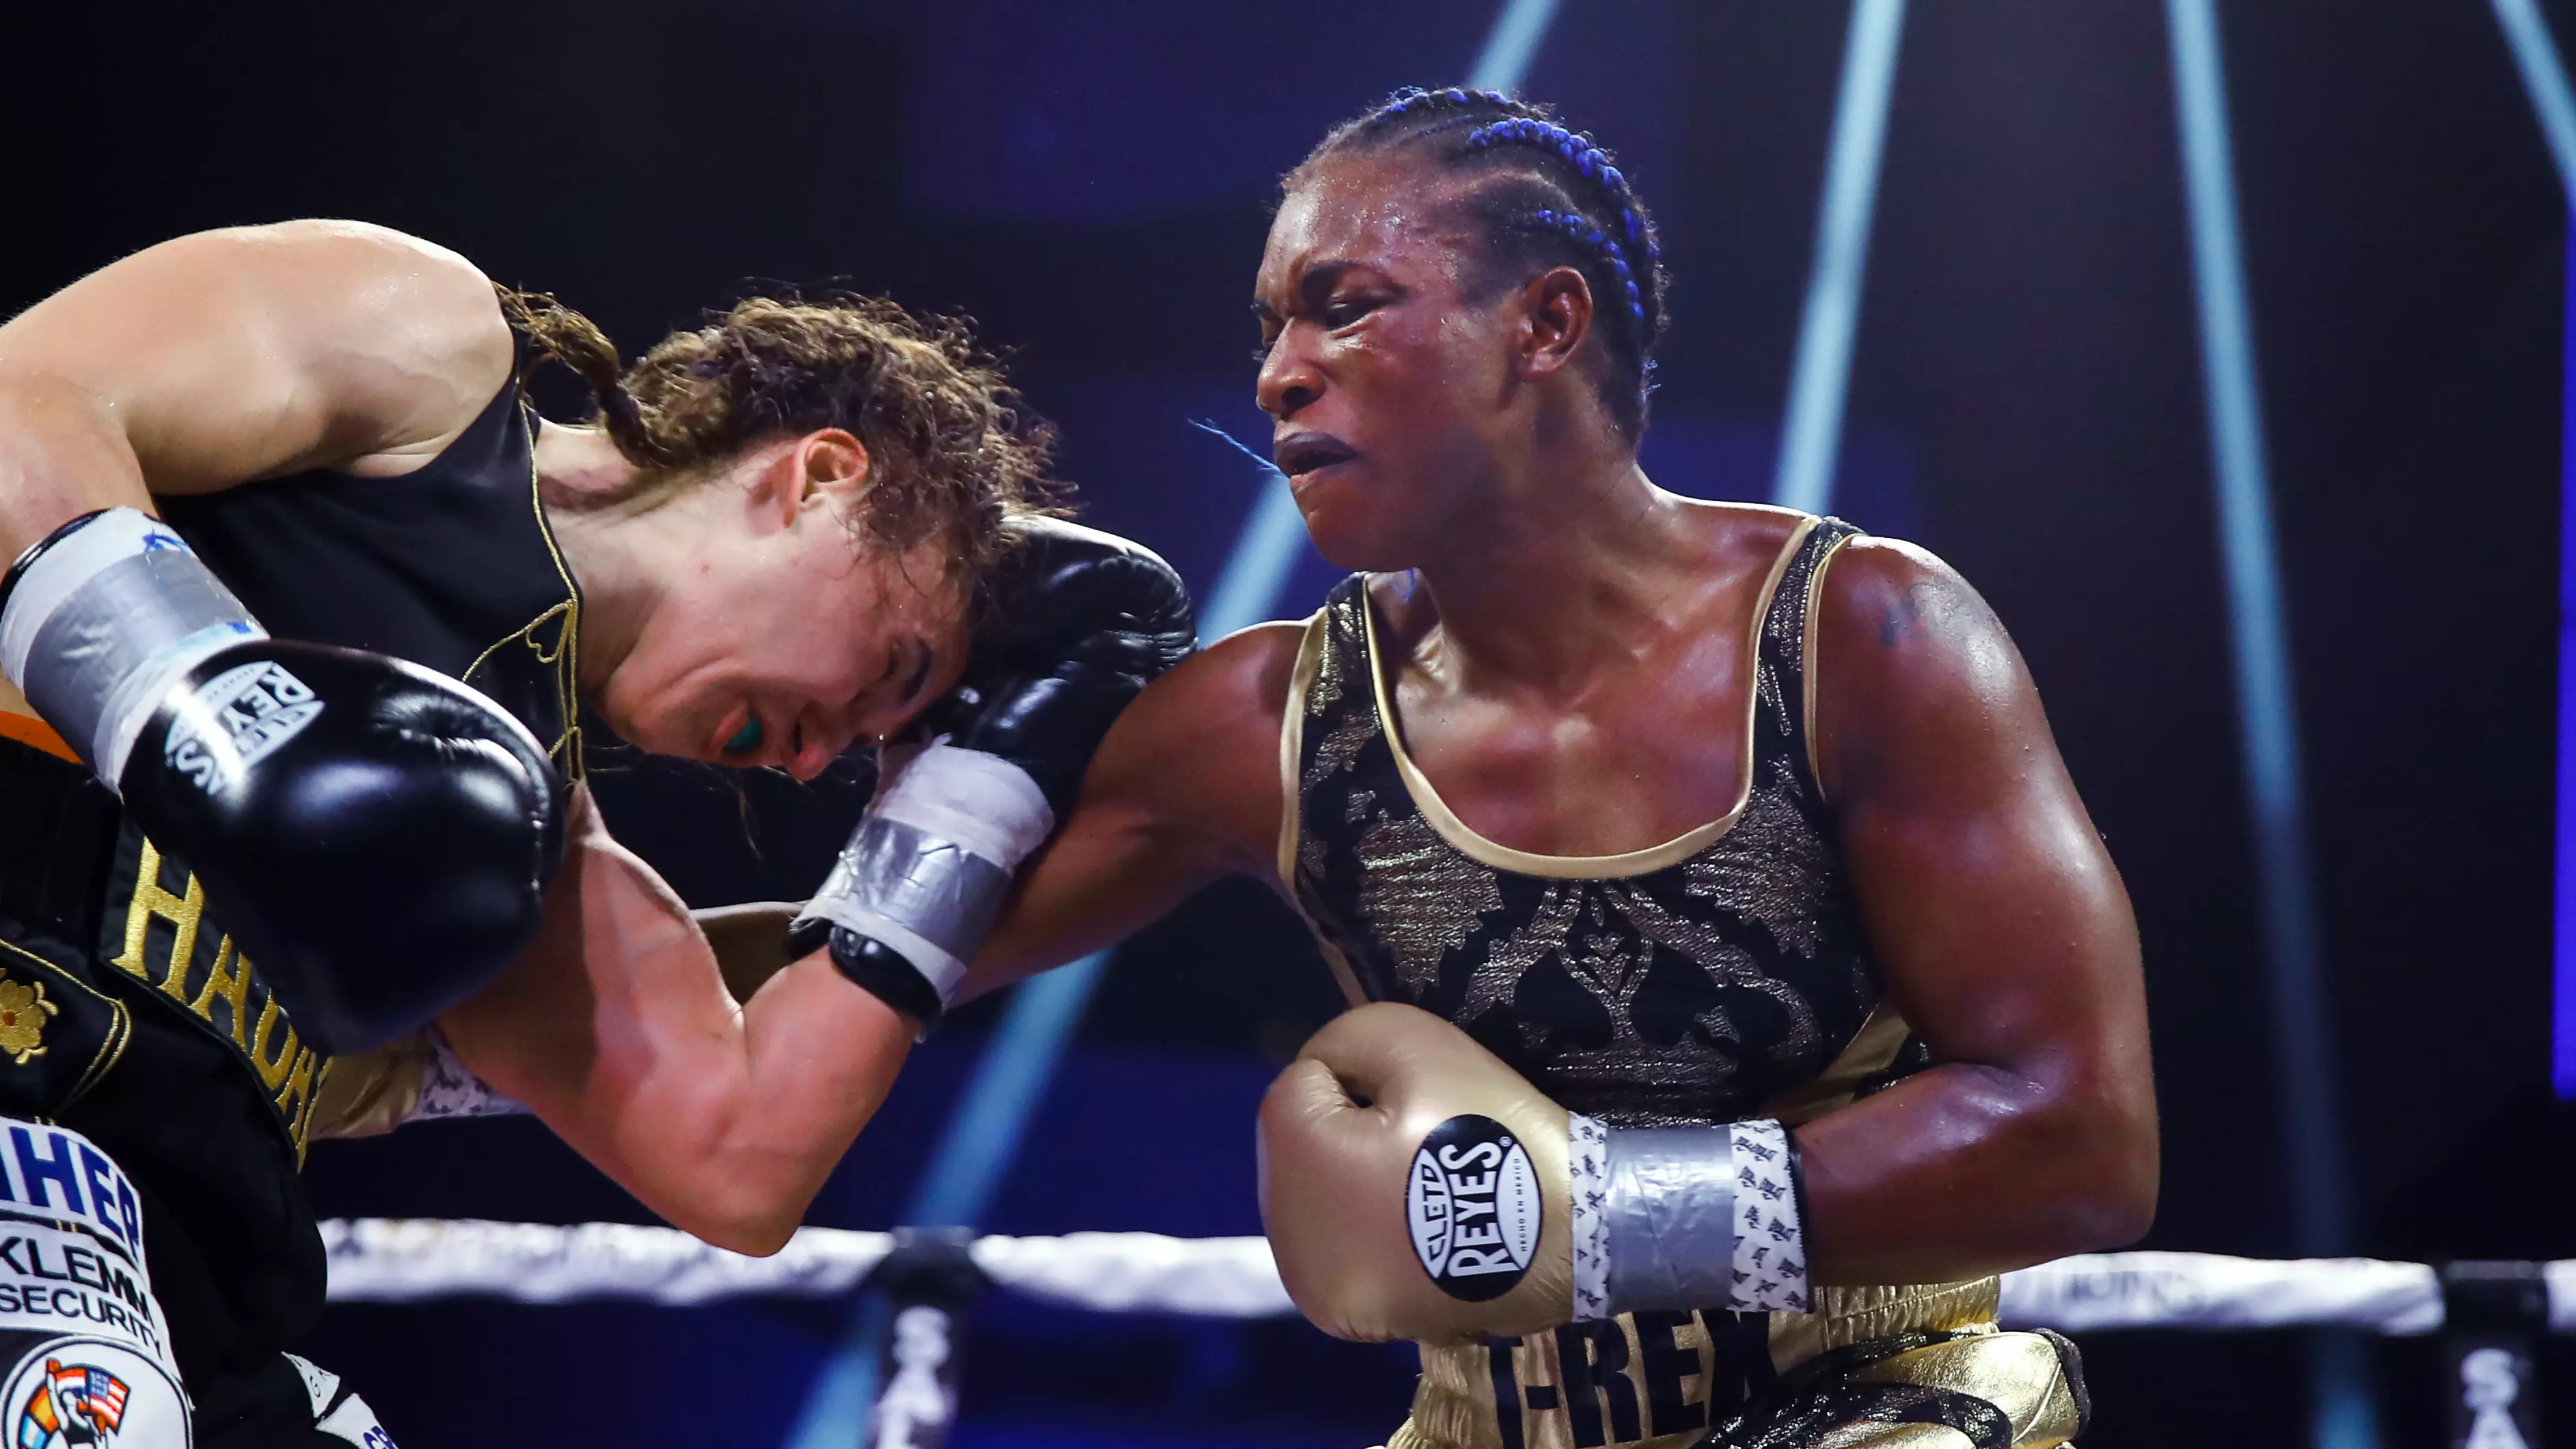 Olympic Boxing Gold Medalist Claressa Shields Has Vowed To 'Beat The S**t' Out Of Jake Paul